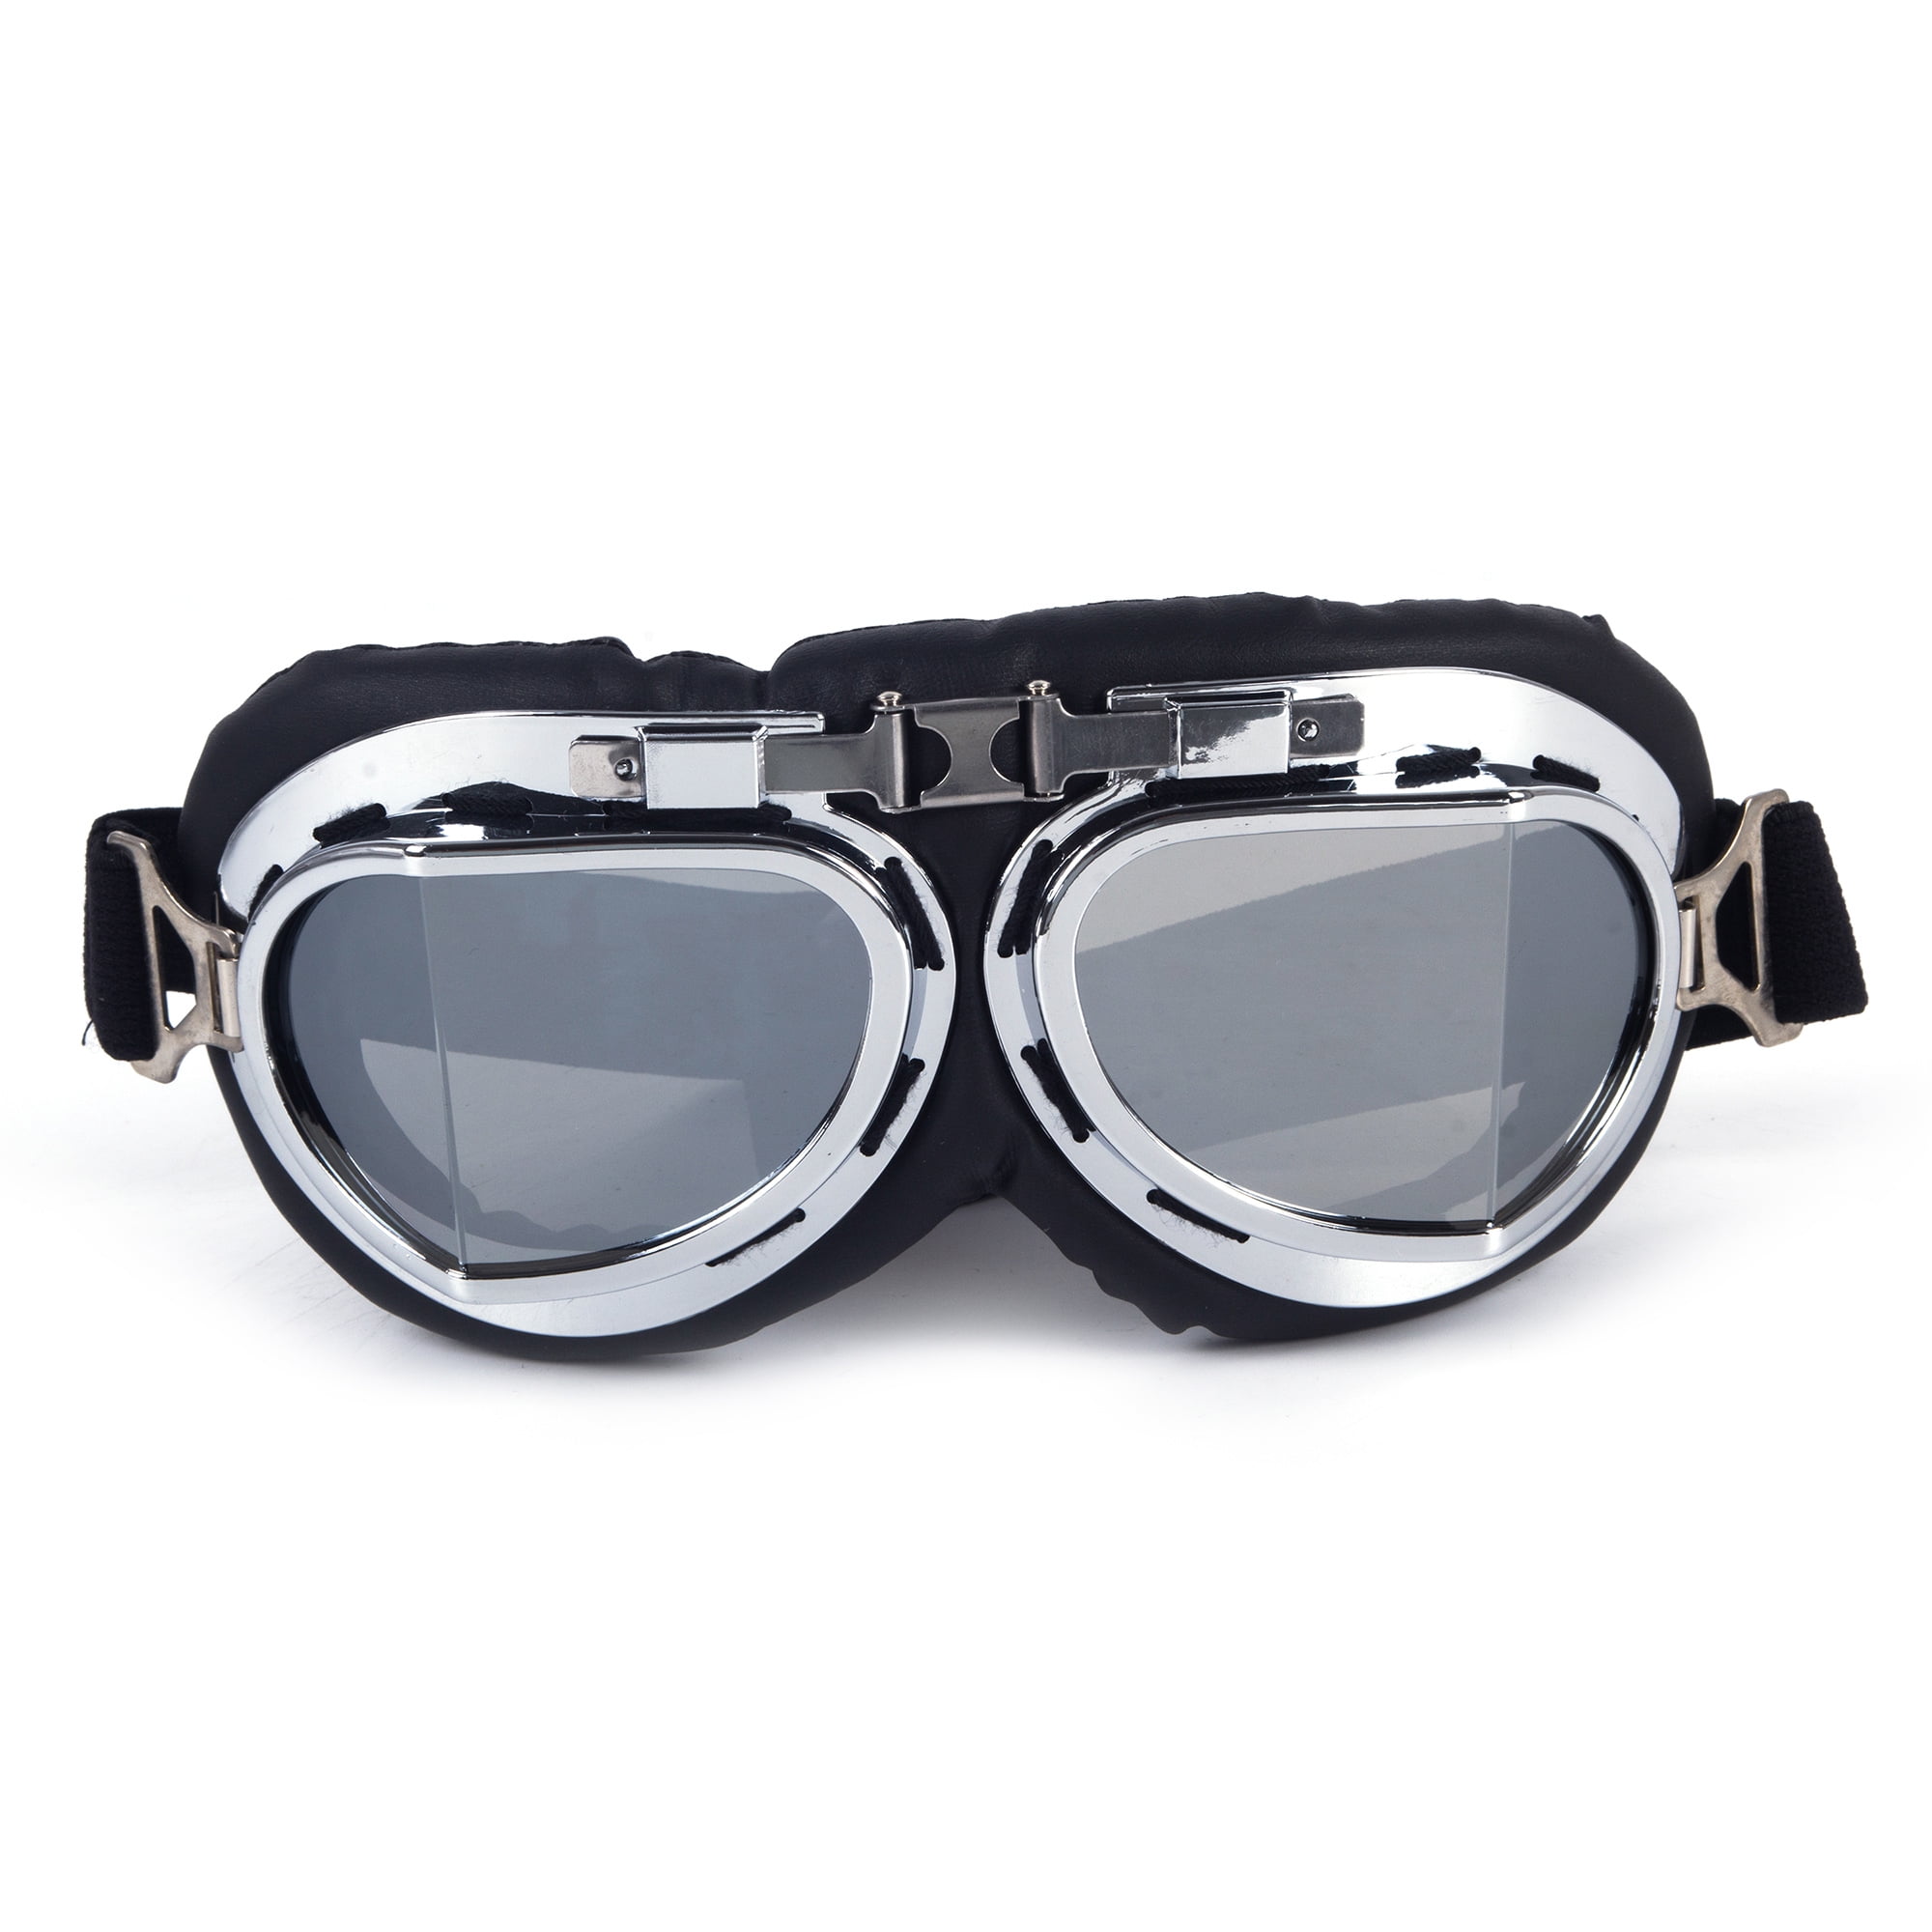 NOMAD FOLDING MOTORCYCLE GOGGLES SILVER FRAMES BLUE MIRROR LENS 4522